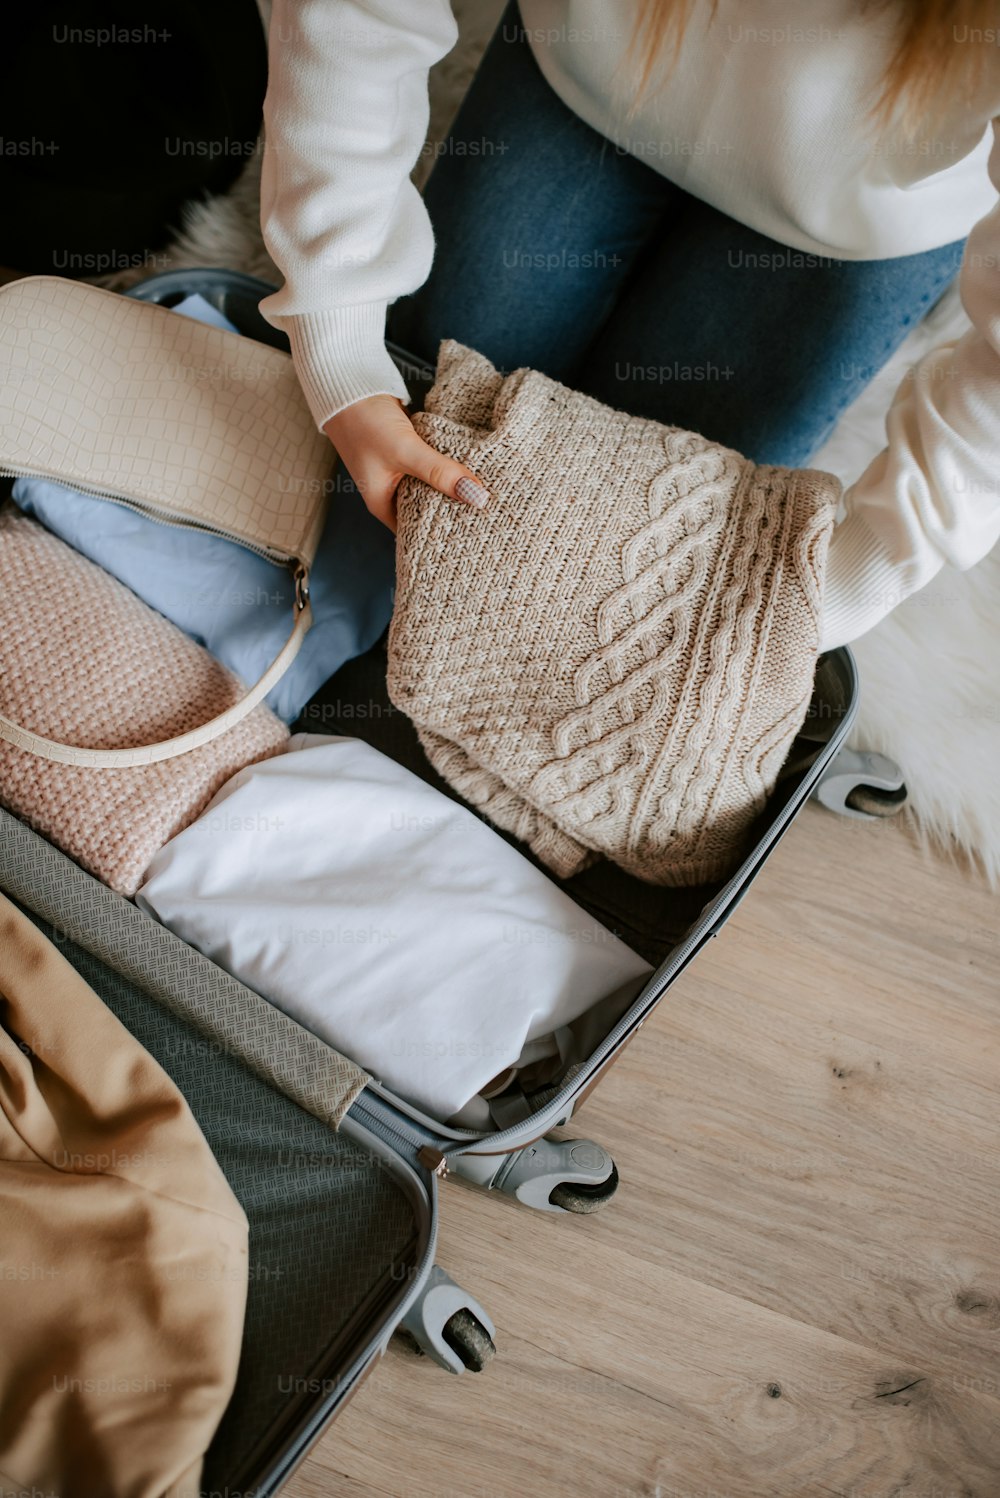 Packing Suitcase Pictures  Download Free Images on Unsplash